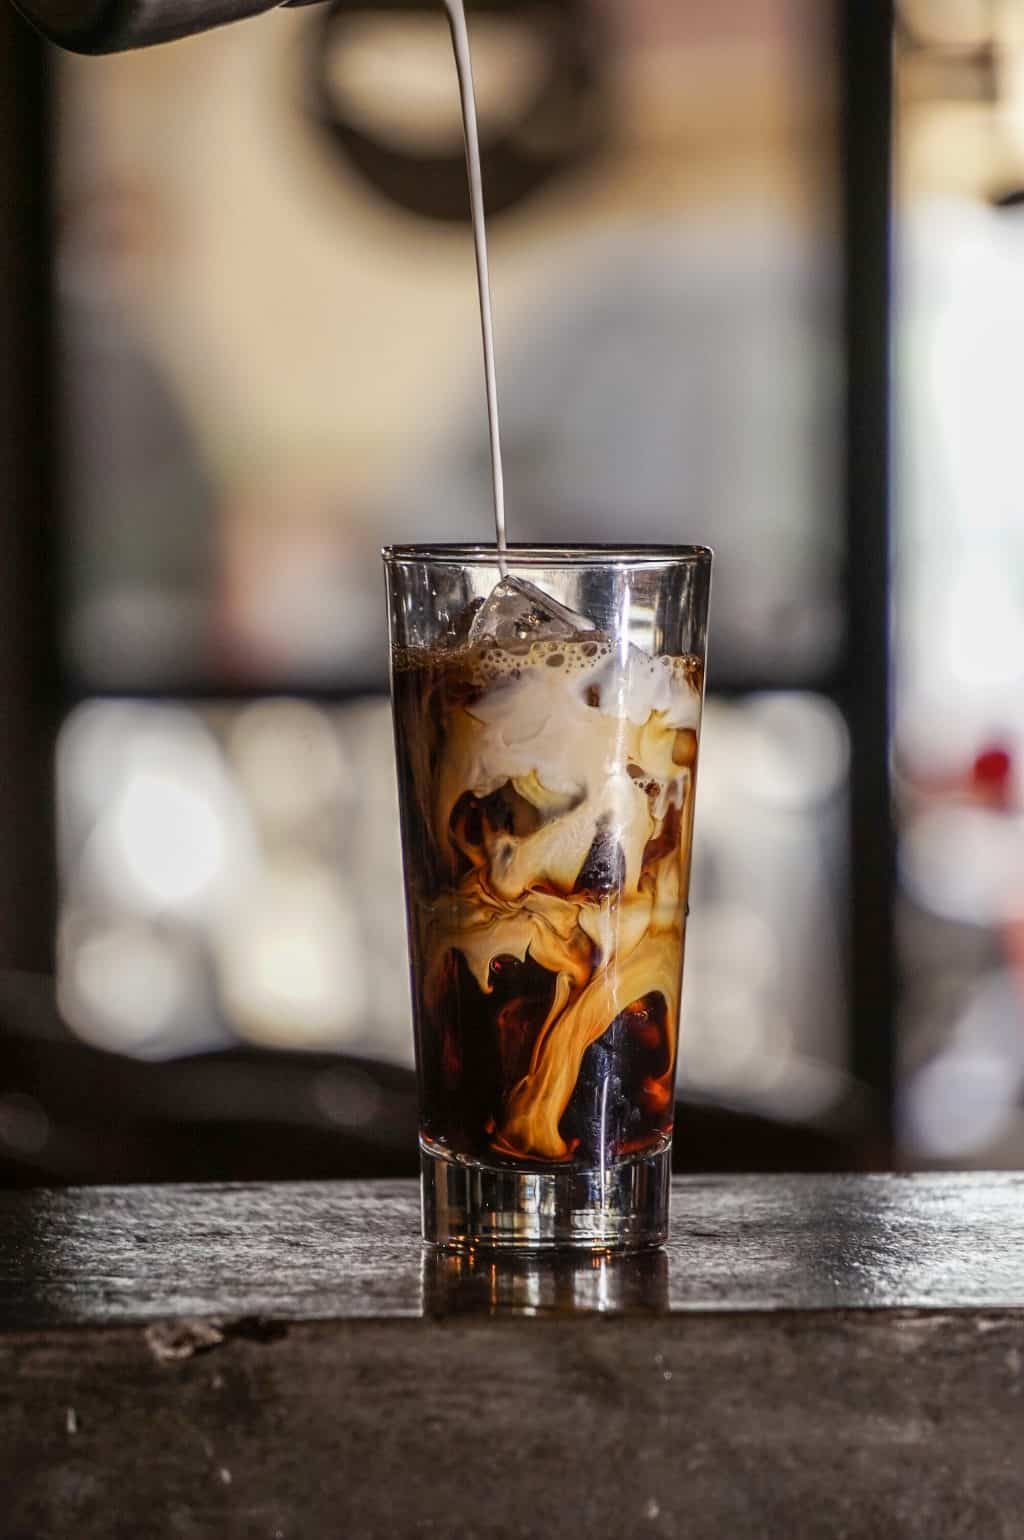 Cold Brew Vs Iced Coffee: Whats the Difference Anyway?